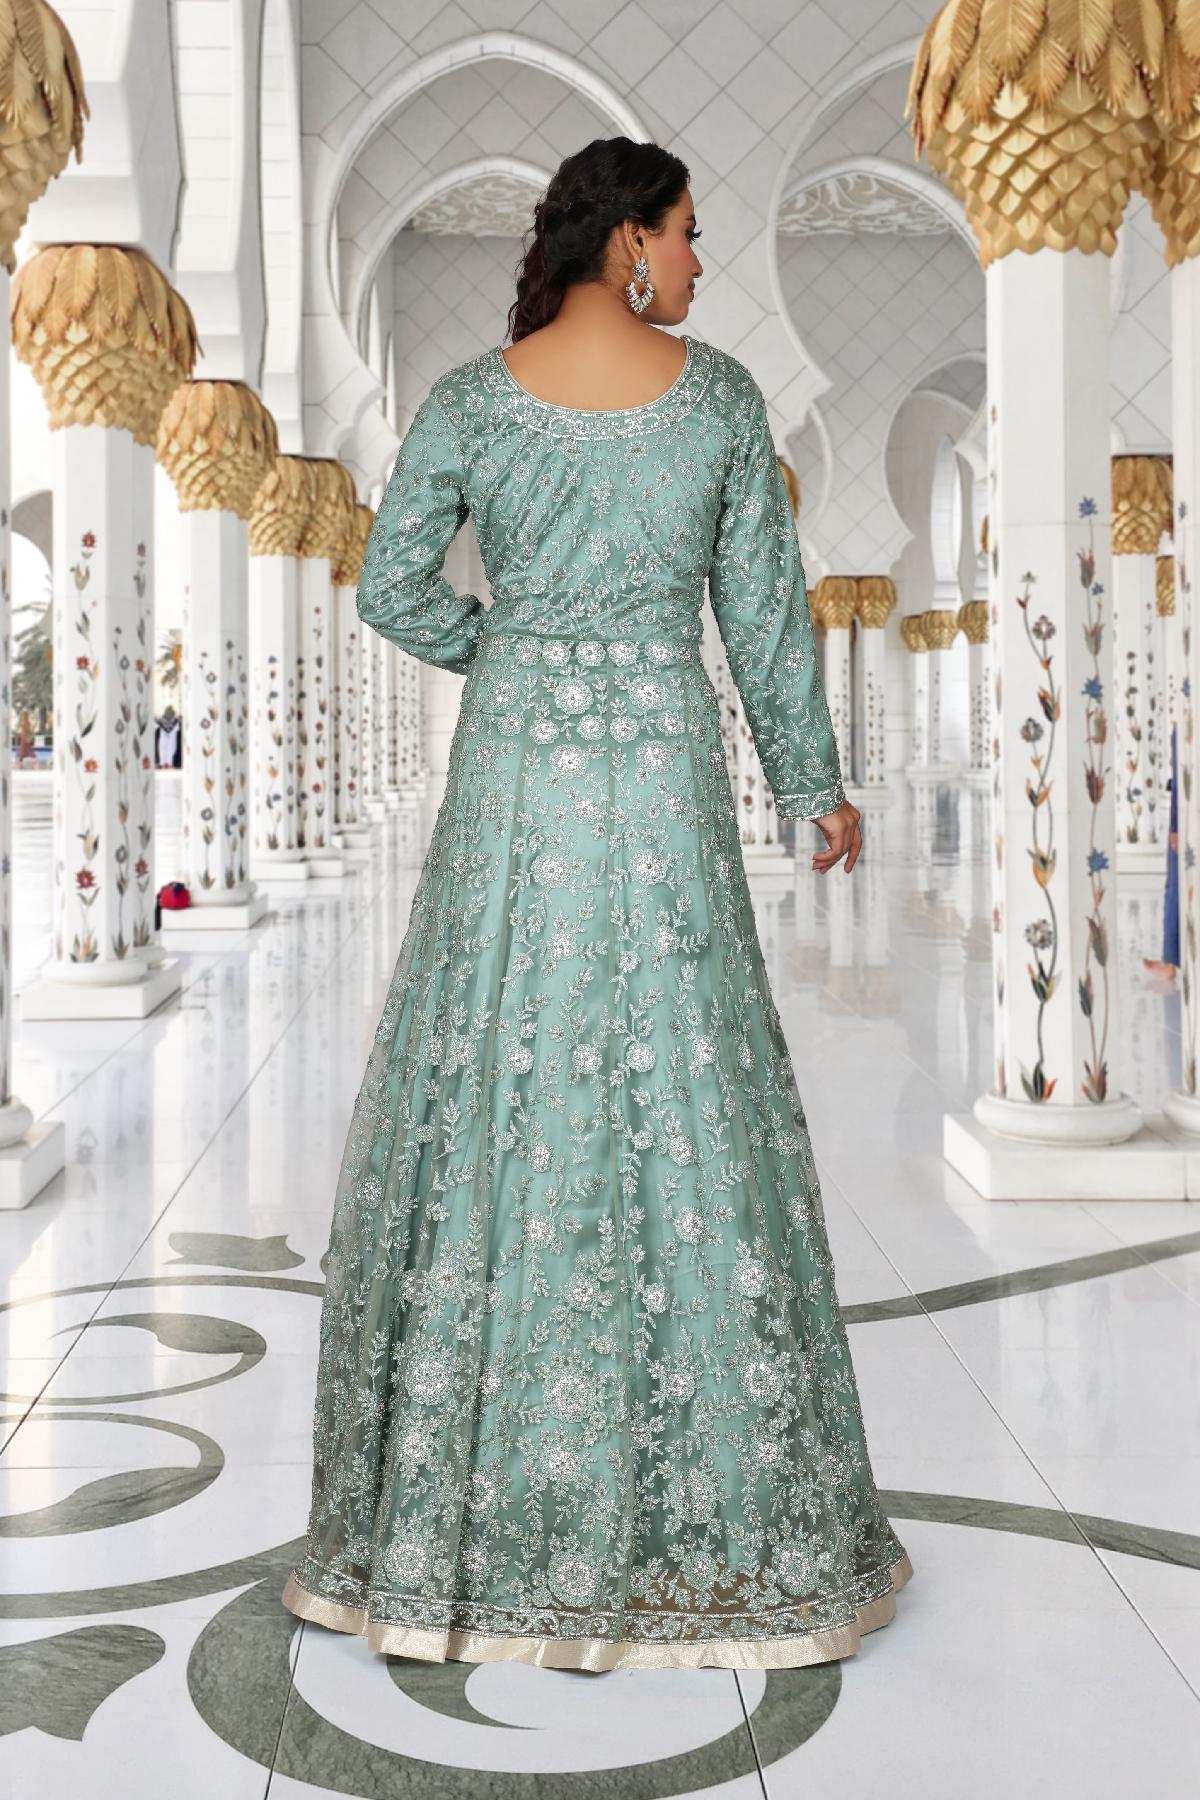 Ethnic Gown In Wayanad  Ethnic Gown Manufacturers Suppliers Wayanad